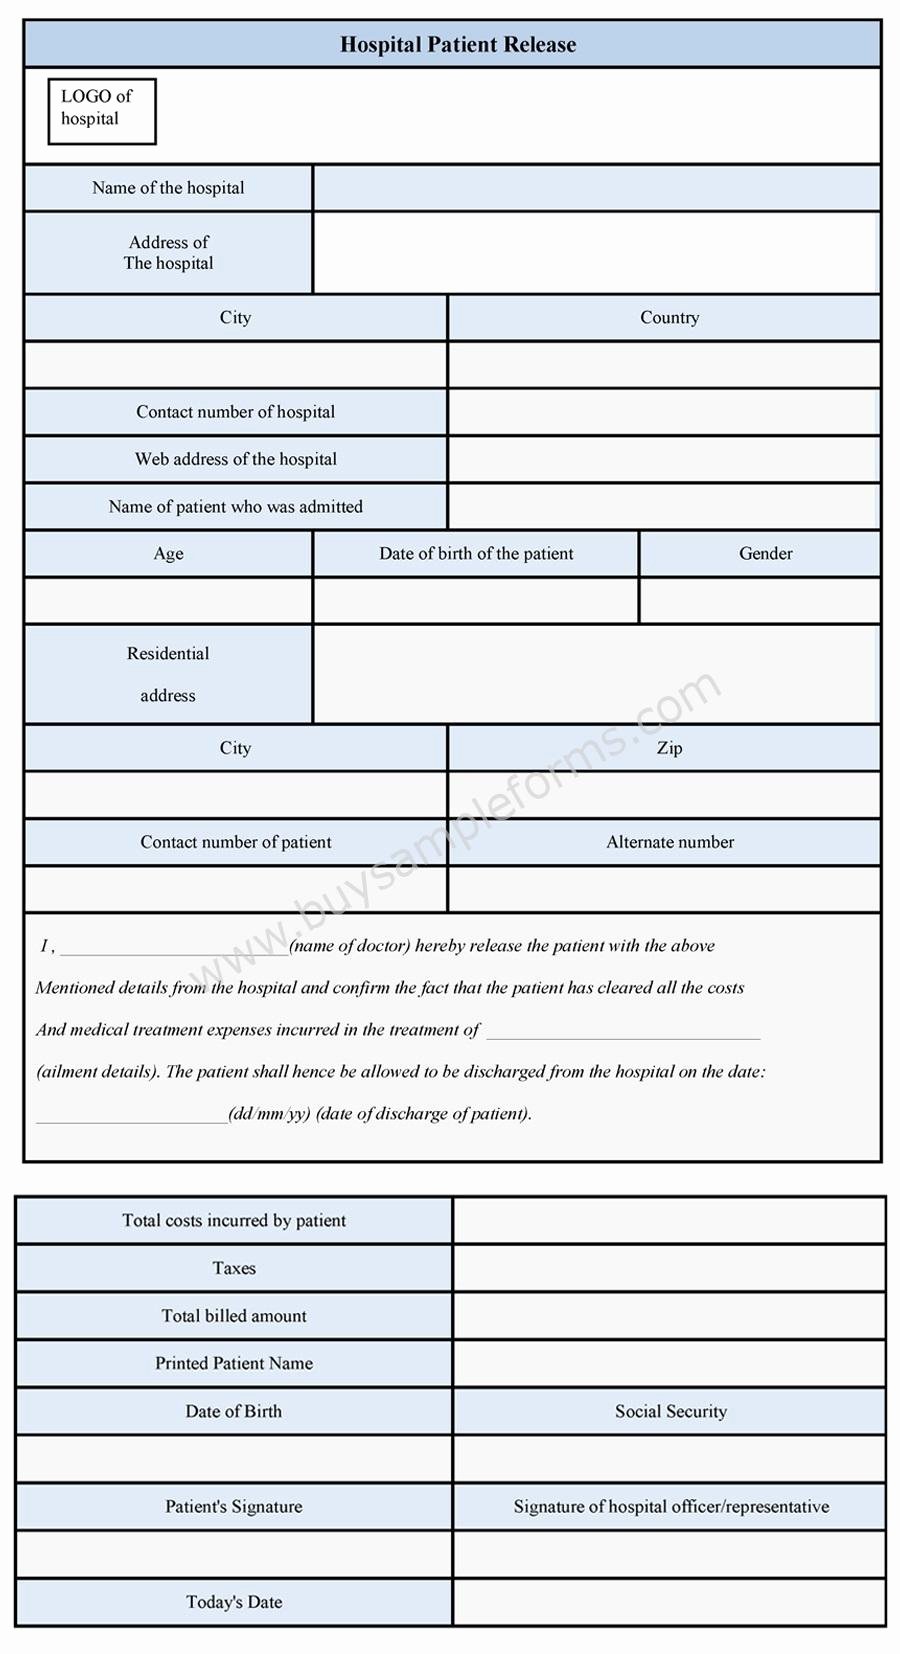 Hospital Release form Template Luxury Hospital Patient Release form Sample forms